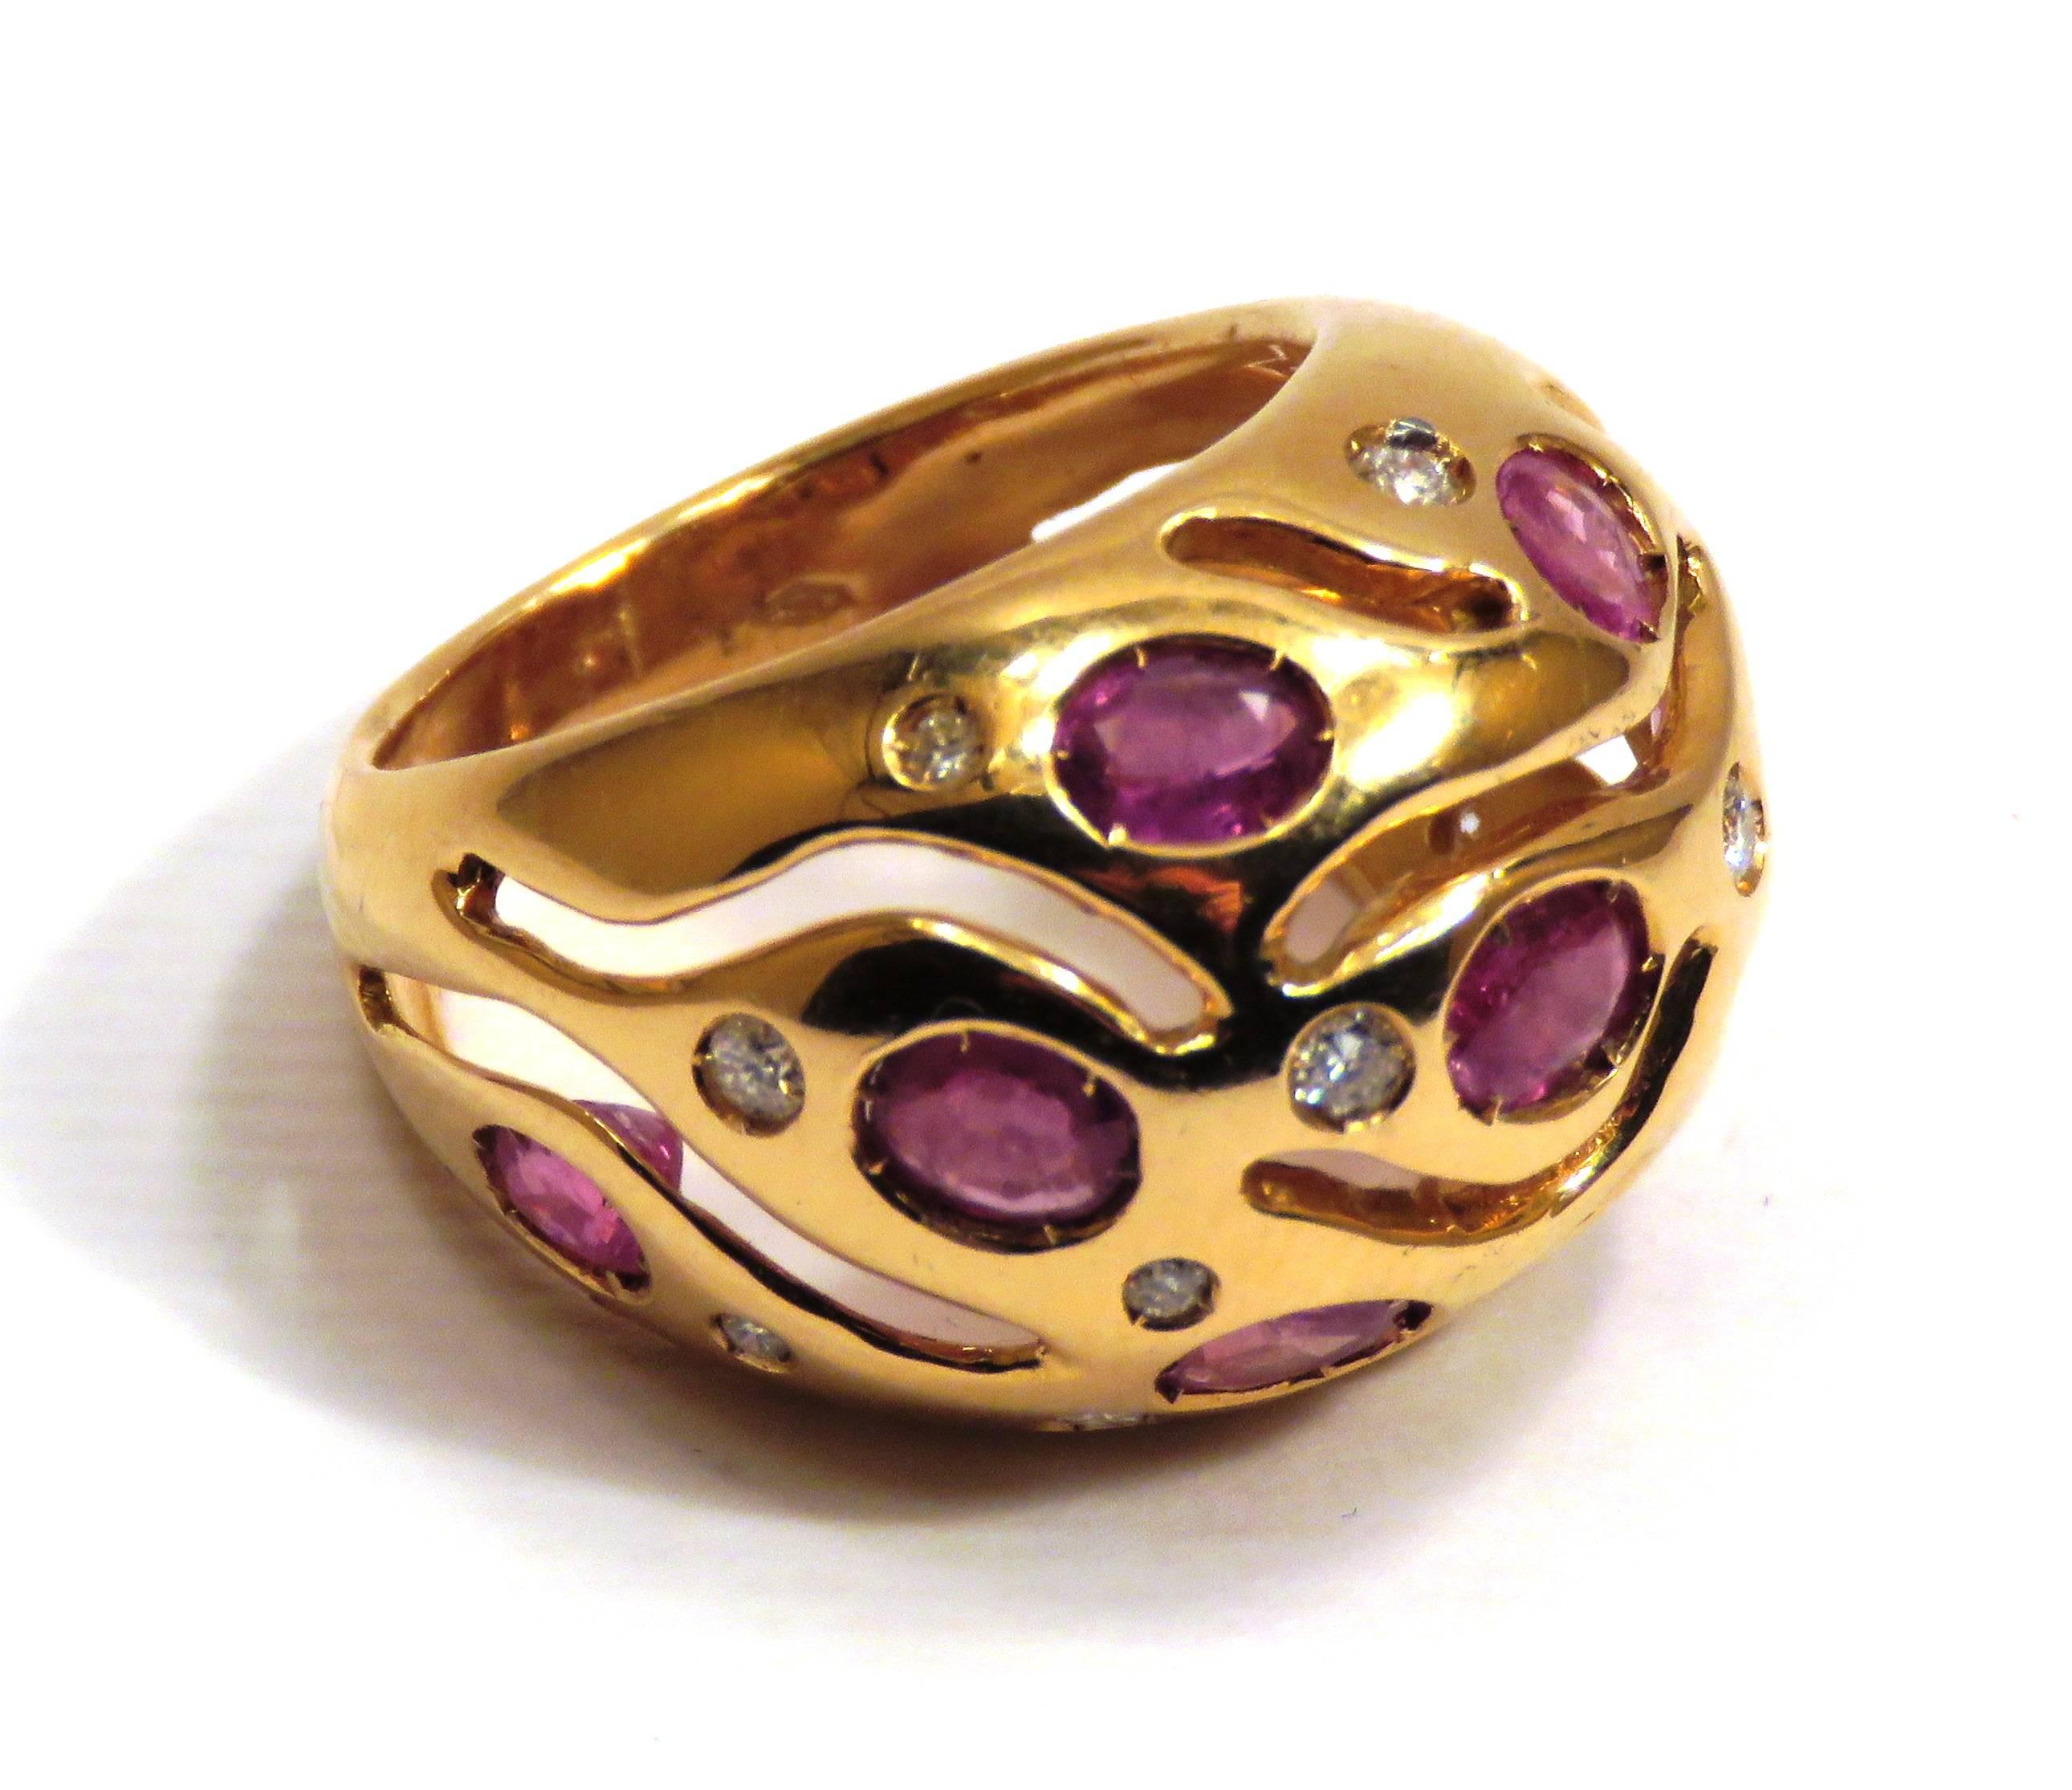 Brilliant Cut Red Rubies Diamonds 18 Karat Rose Gold Cocktail Ring Handcrafted In Italy For Sale